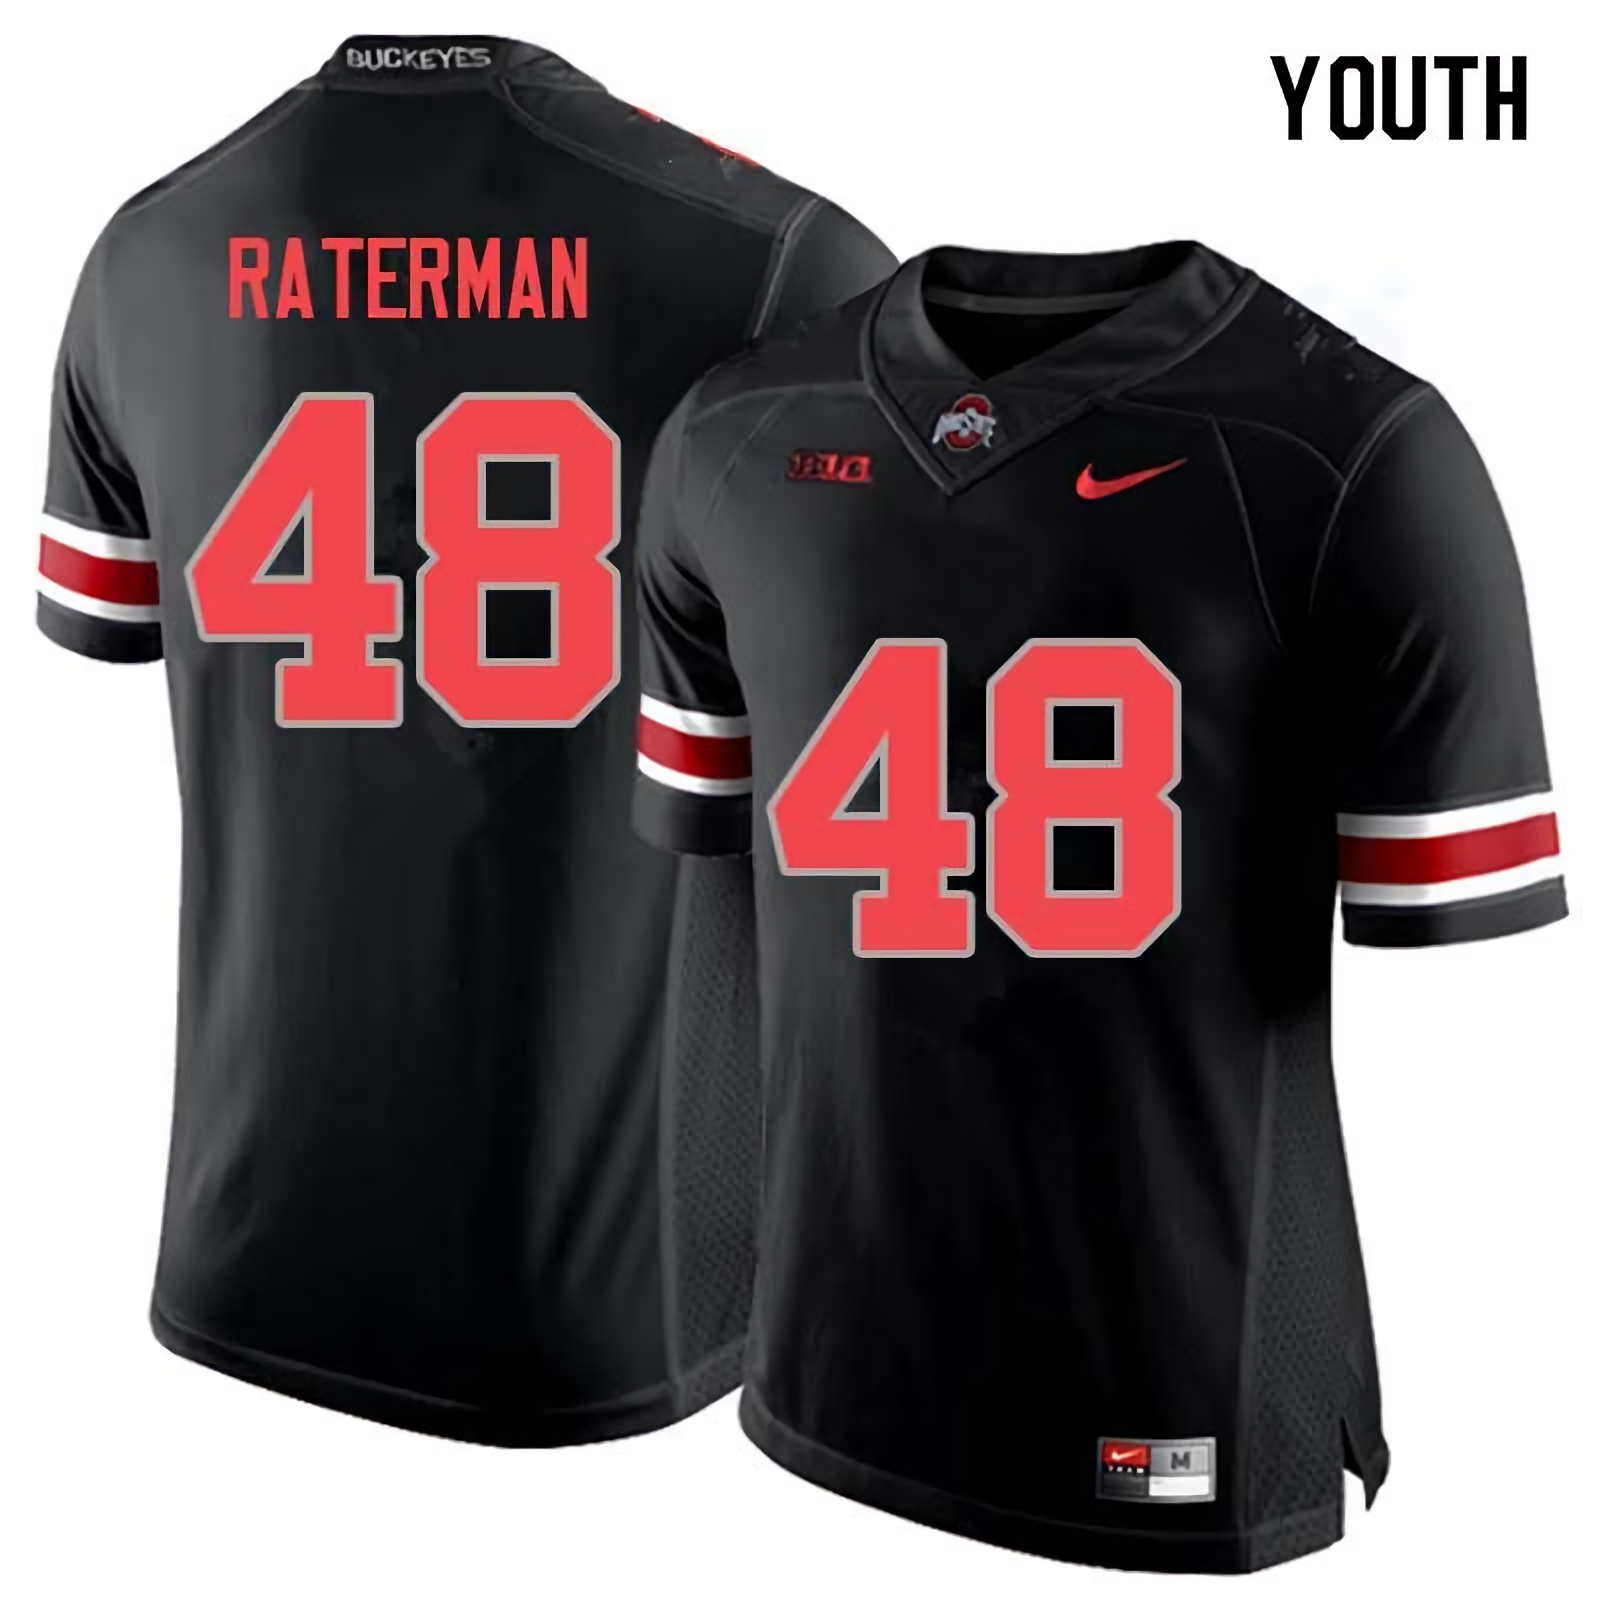 Clay Raterman Ohio State Buckeyes Youth NCAA #48 Nike Blackout College Stitched Football Jersey NCS1656JC